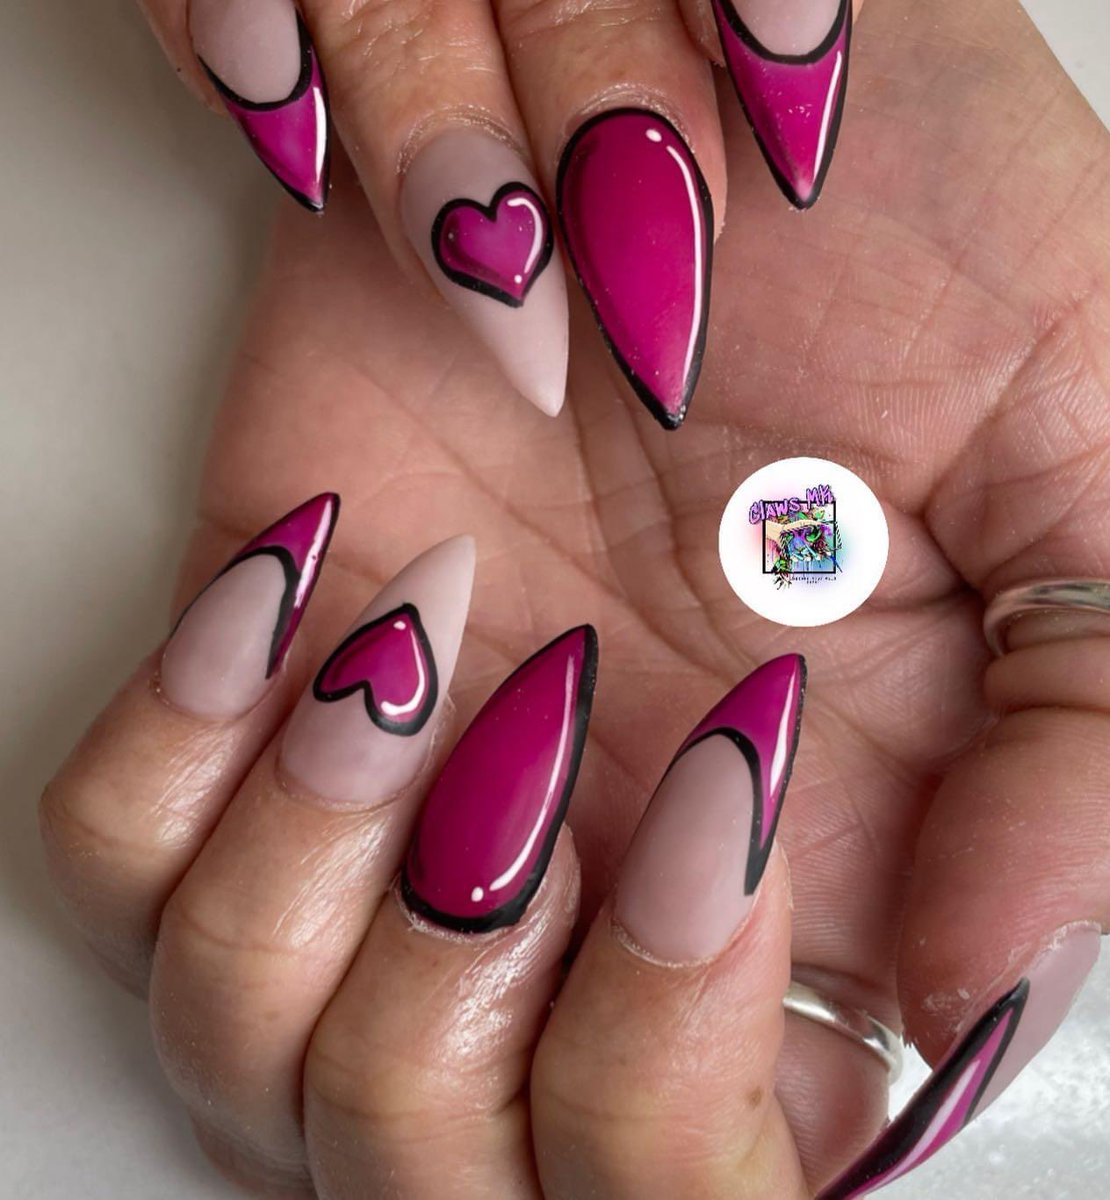 It’s nail day 🥰
Always feel a bit better with my nails done 

#selfcare #nails #acrylicnails #stilettonails #pinknails #comicnails #popartnails #heartnails #nailart #handpaintednailart